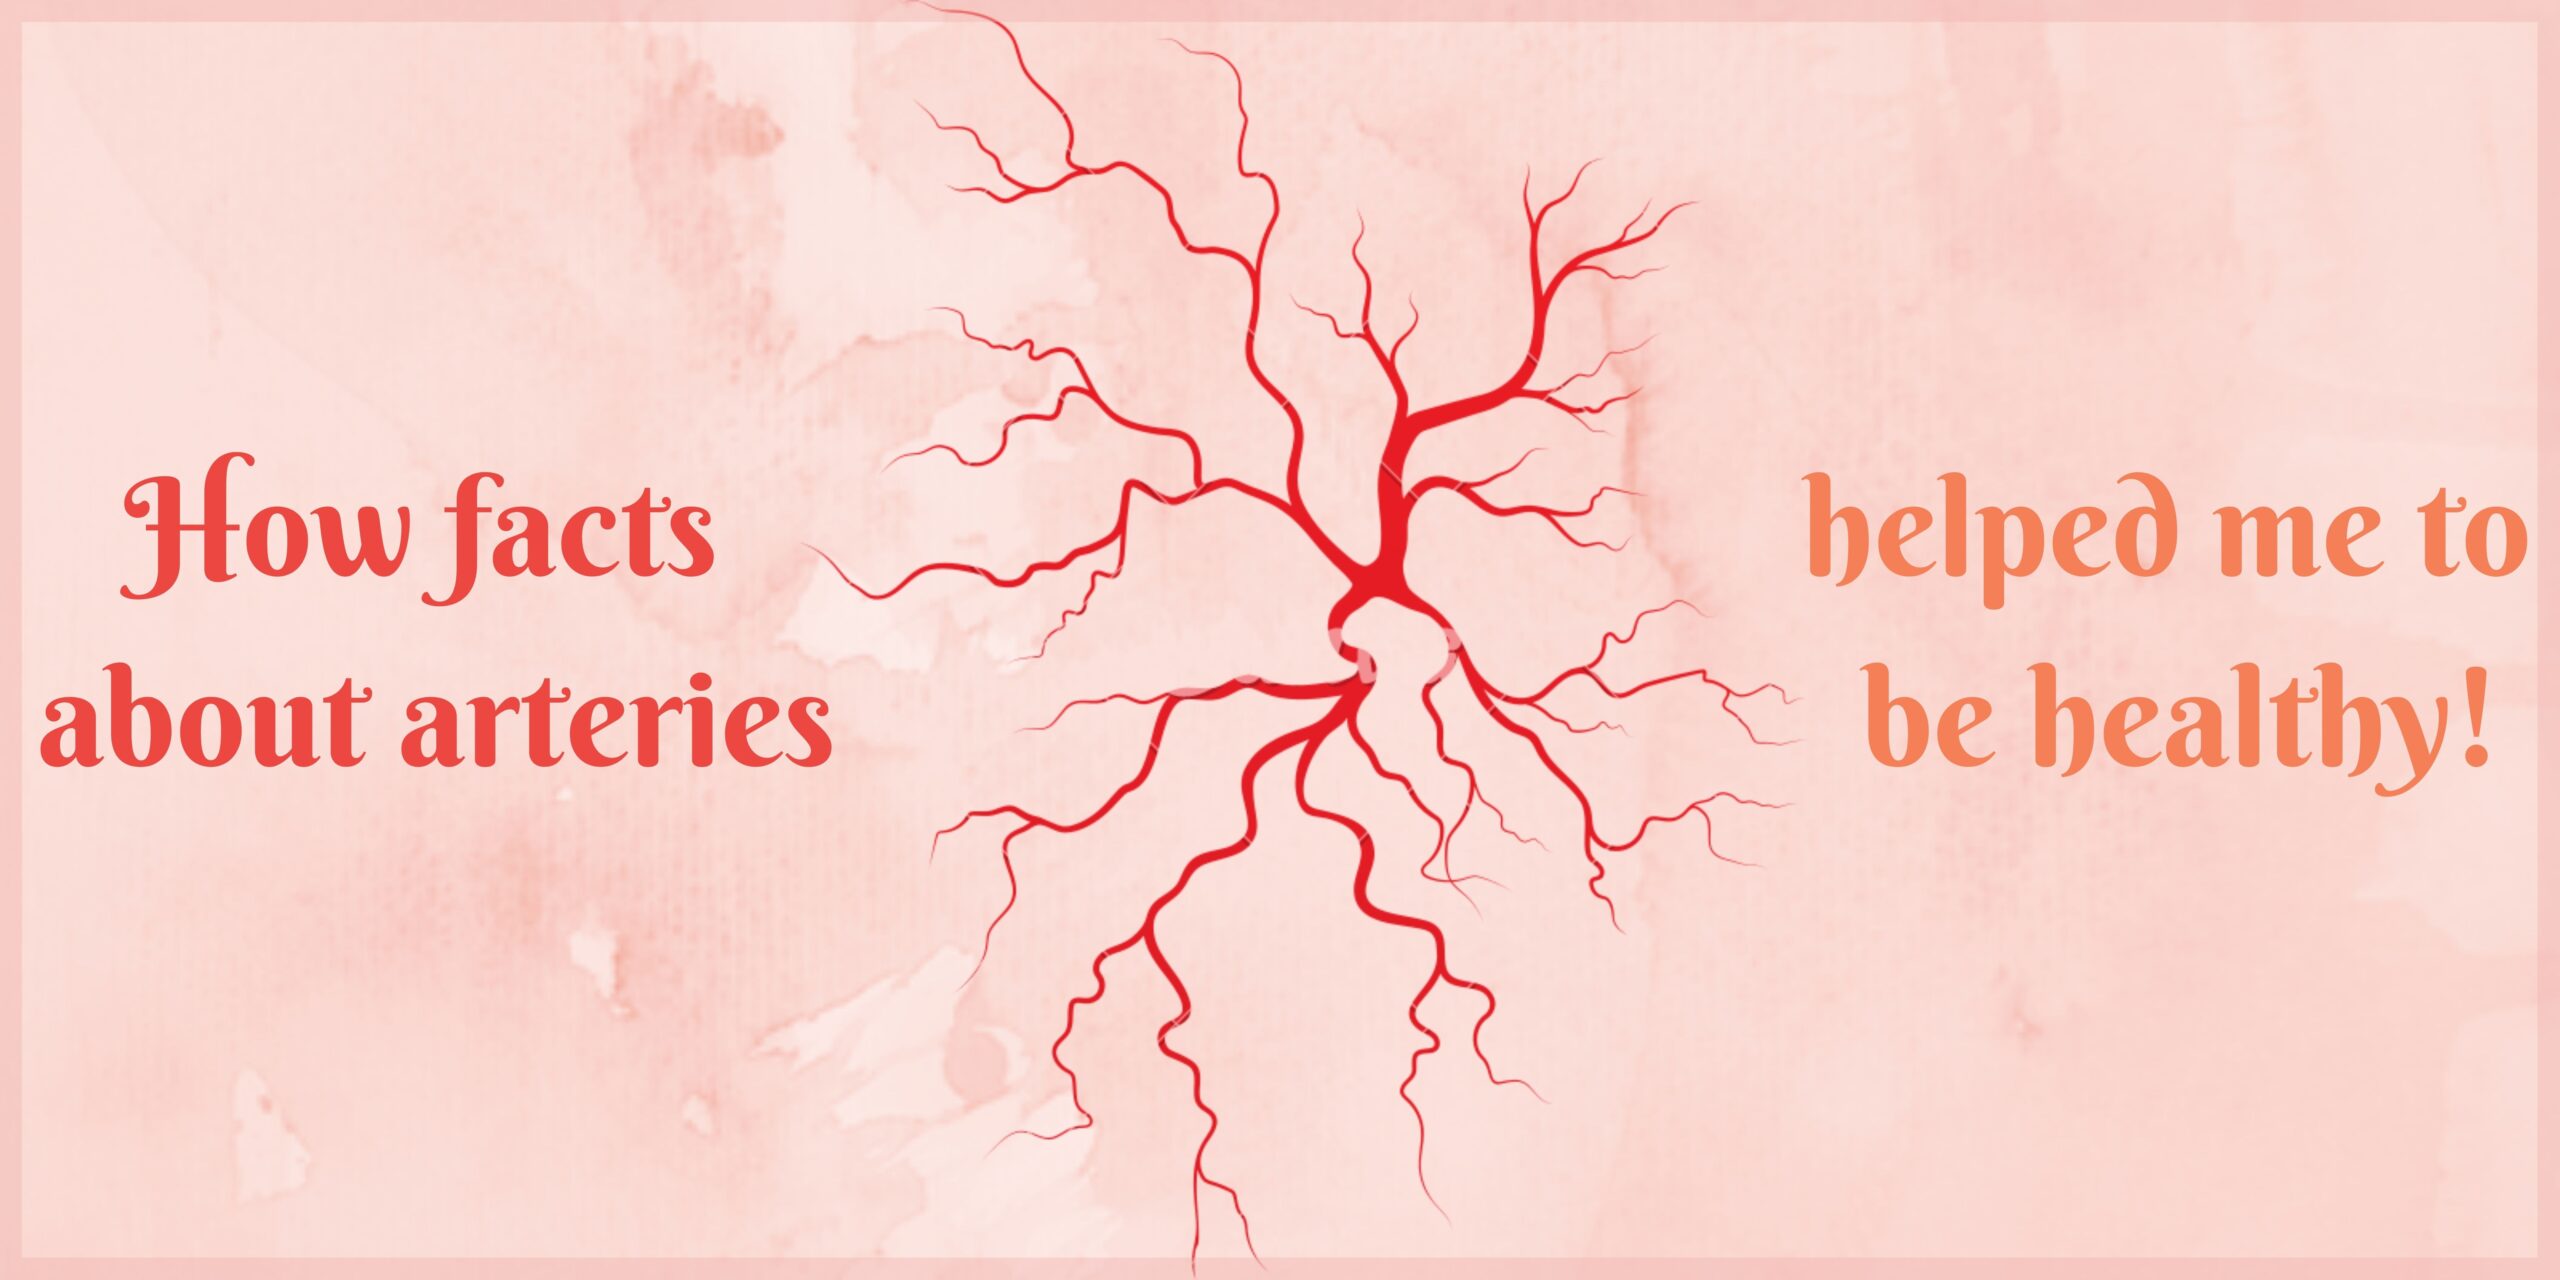 My life, my well-being: How facts about arteries helped me to be healthy!